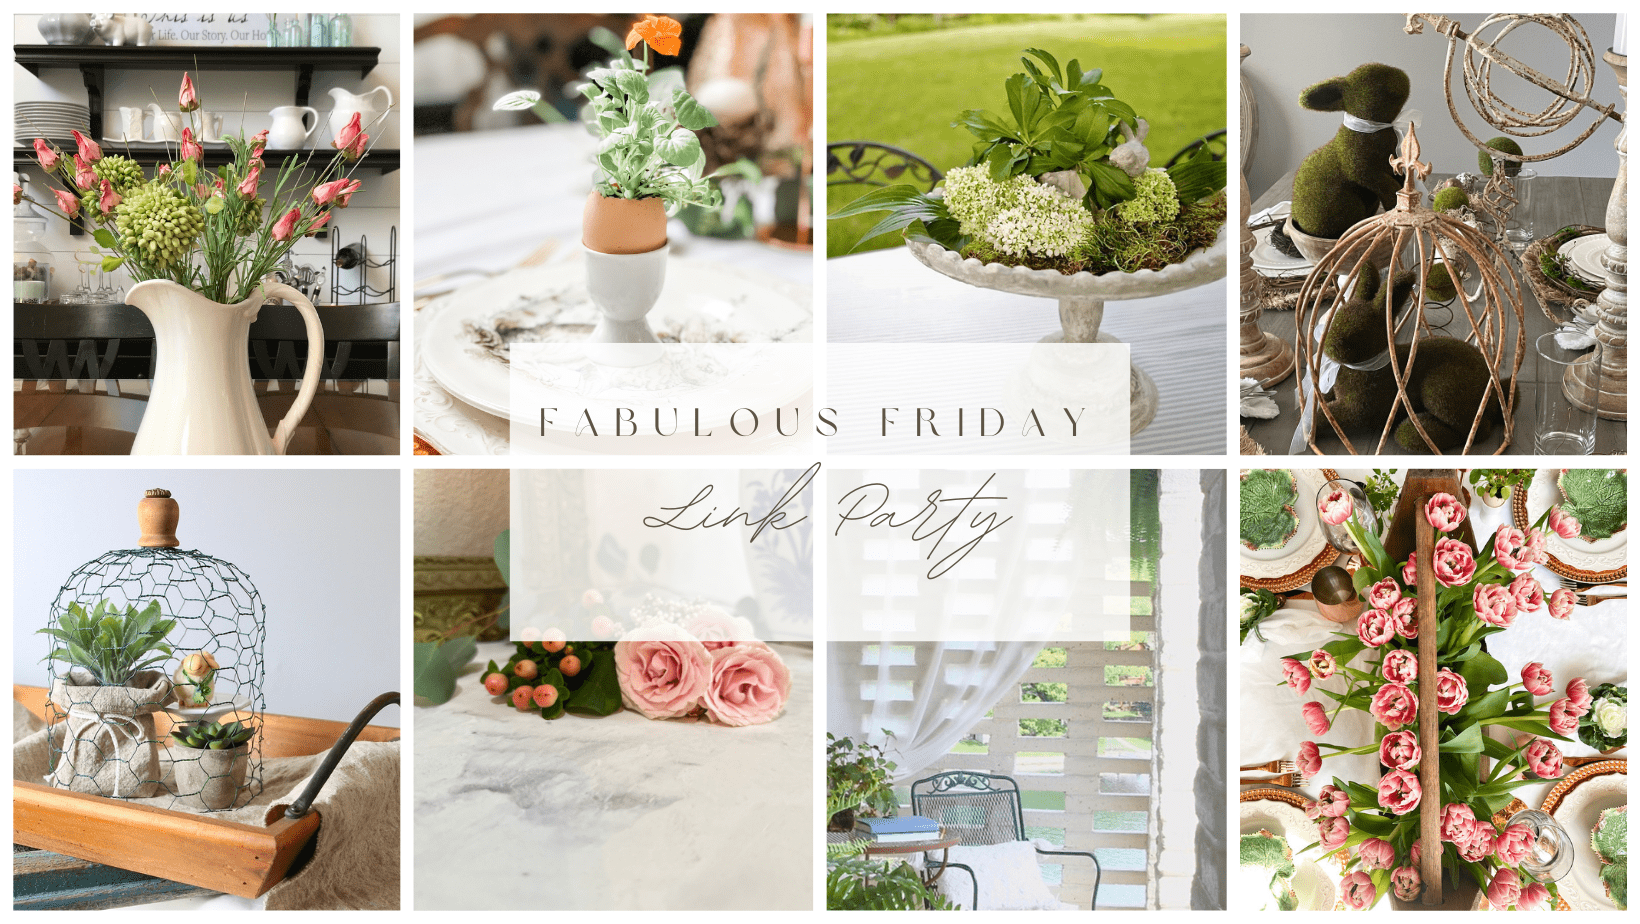 Fabulous Friday Link Party 3.24.23